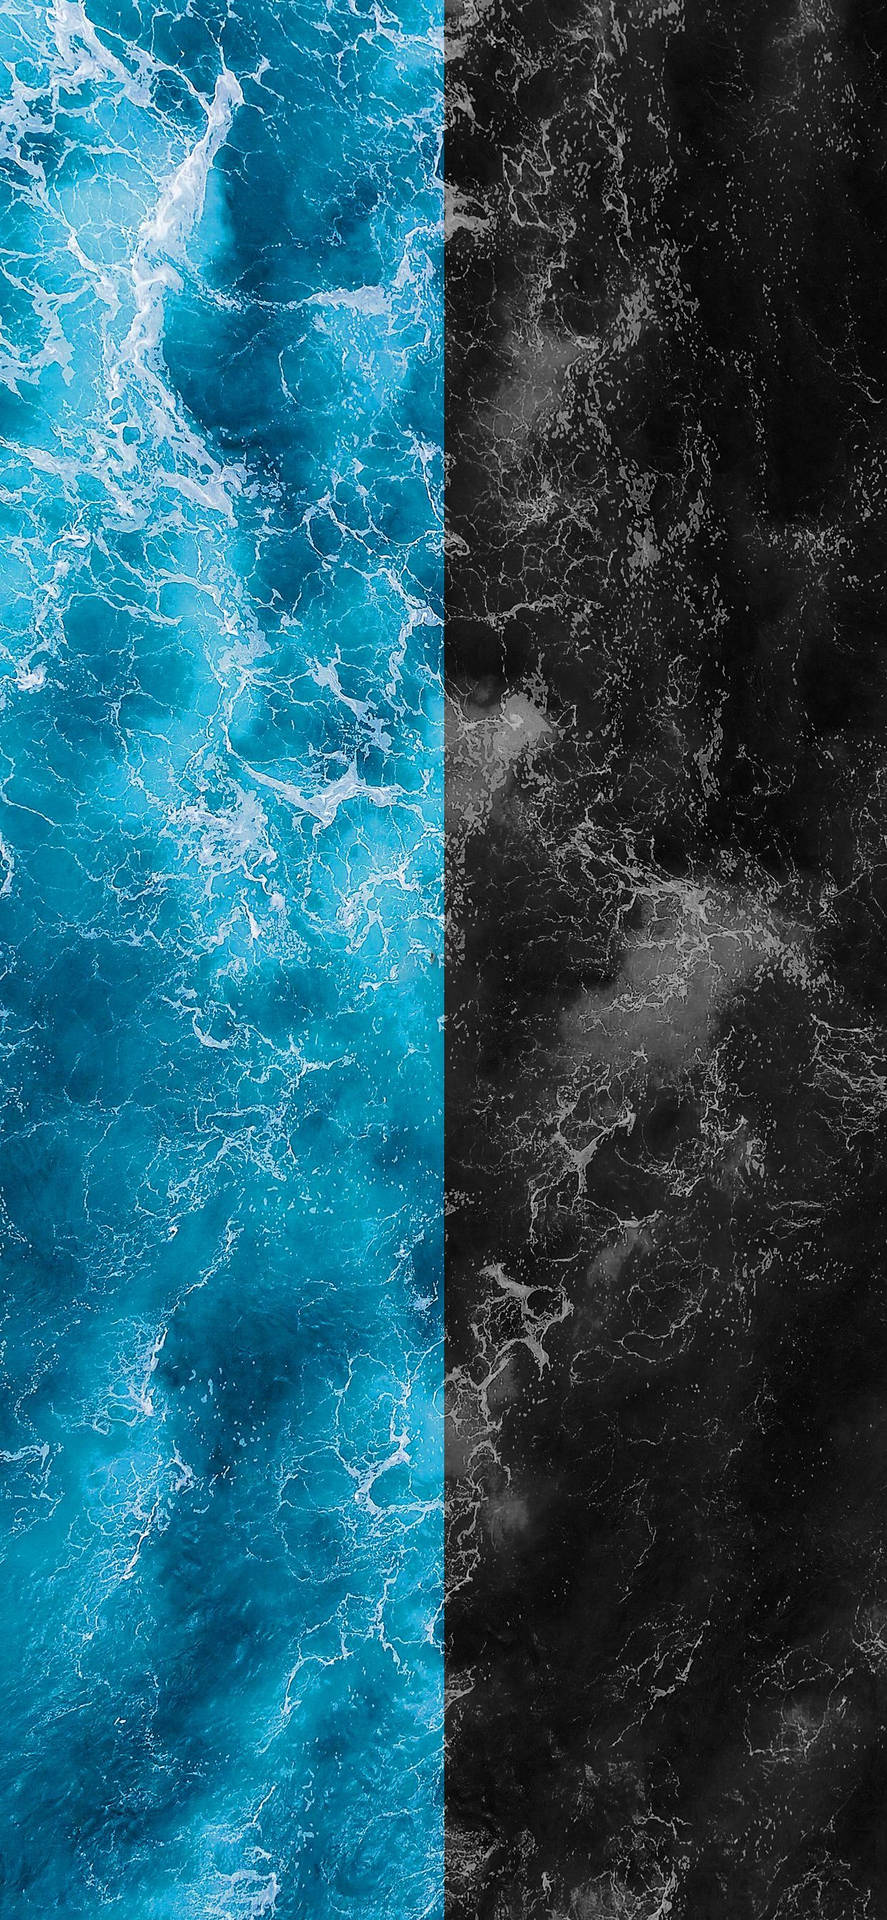 A Split Of Blue And Black Oceans Background